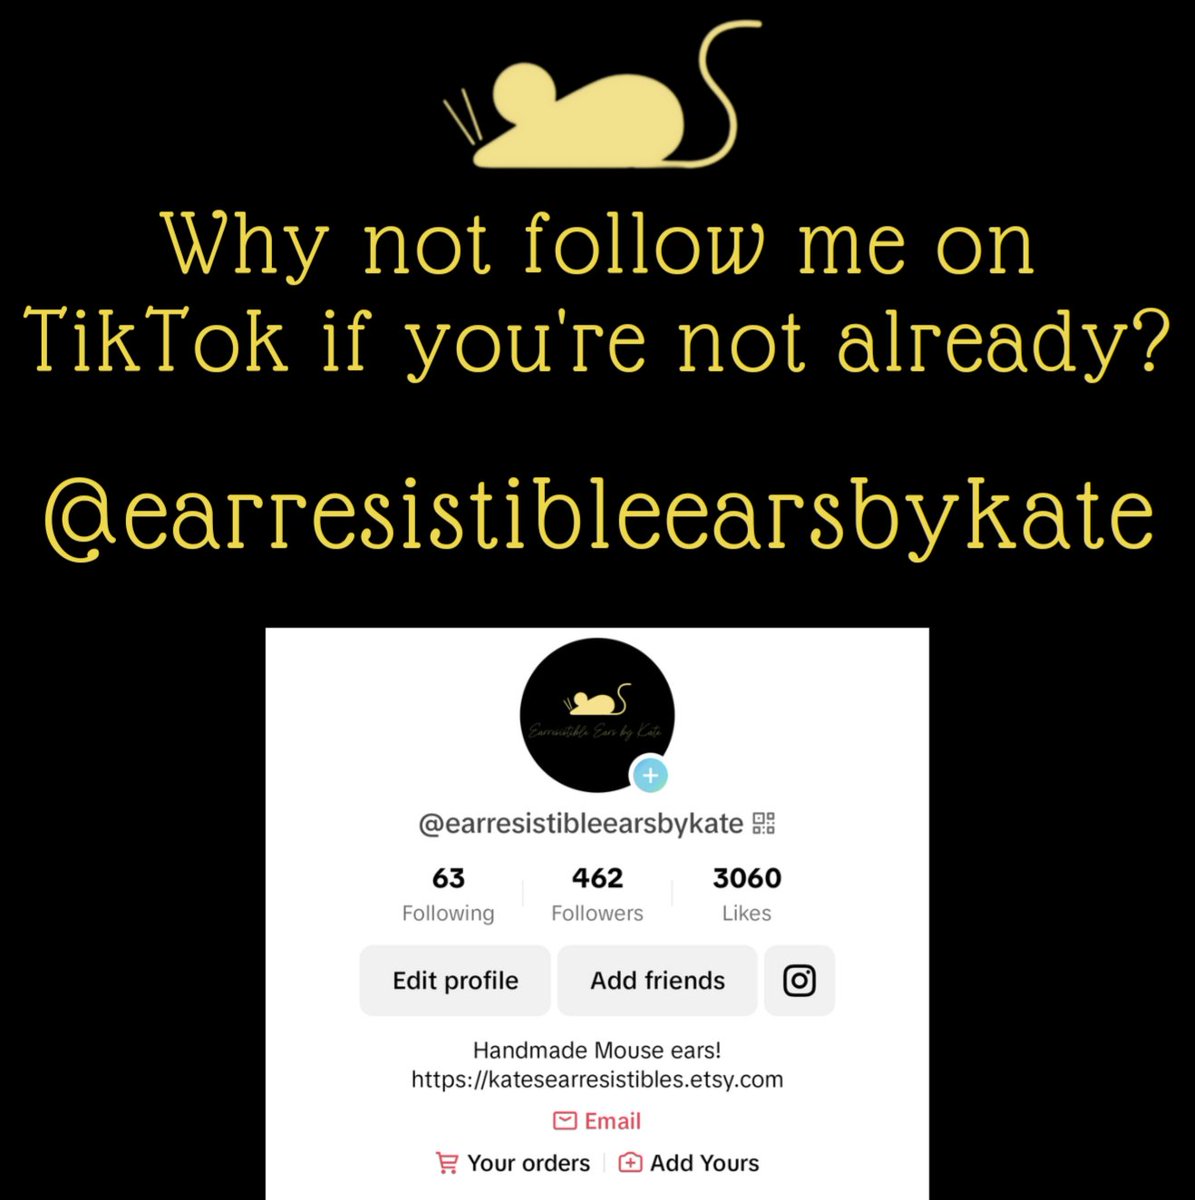 Head over to TikTok to catch all my latest videos! Your follows really help advertise my little shop! ❤️

katesearresistibles.etsy.com

#disneyadult #followme #smallbusinessbigdreams #etsy #mouseears